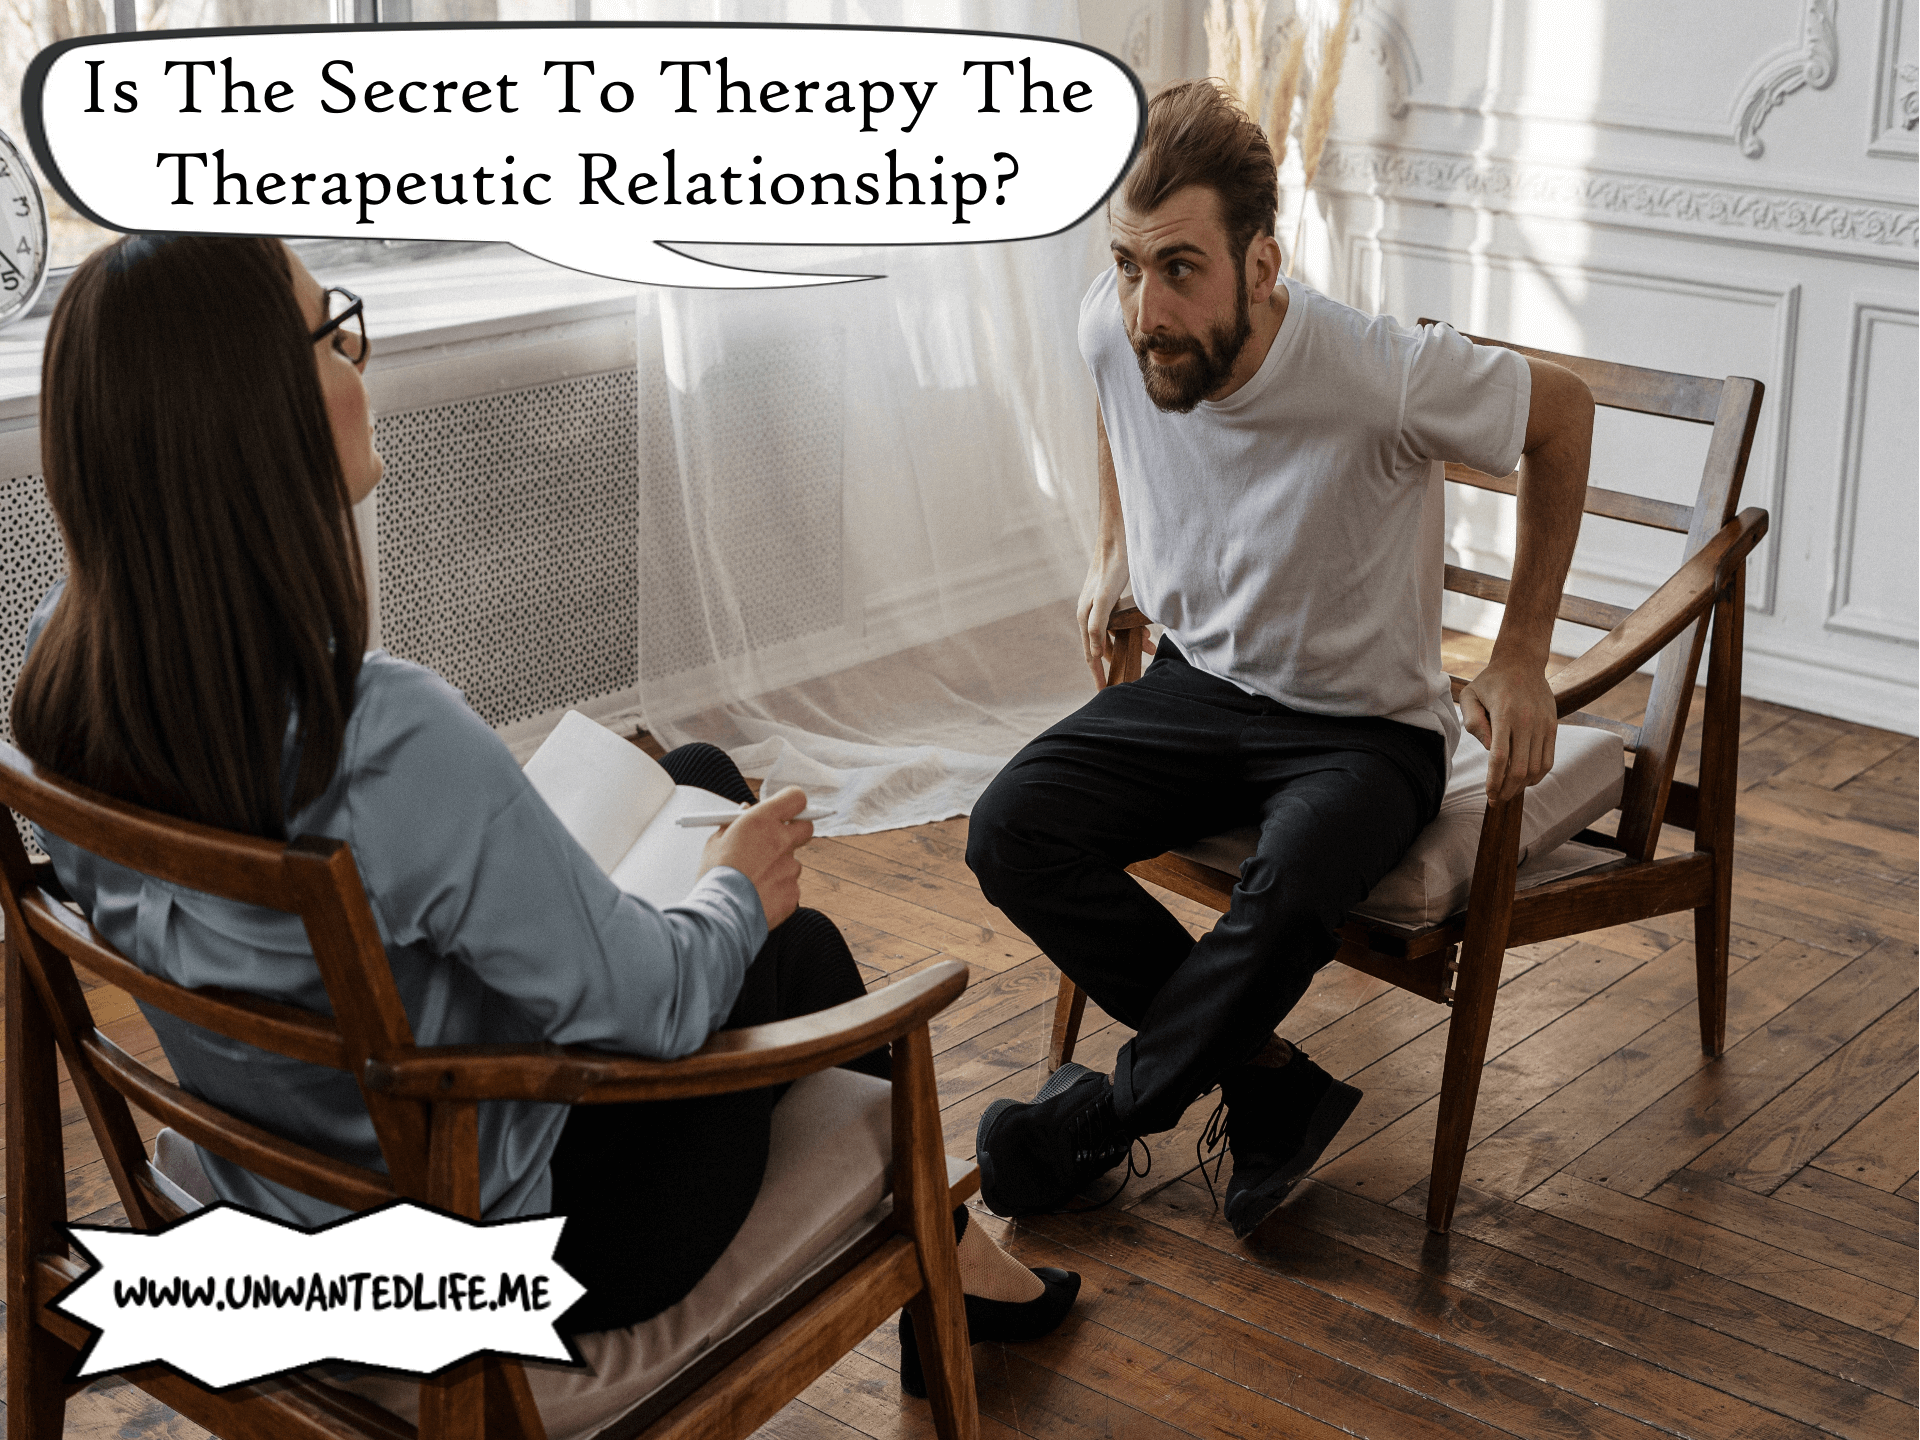 A white female therapist having a counselling session with a white male patient to represent the topic of the article - Is The Secret To Therapy The Therapeutic Relationship